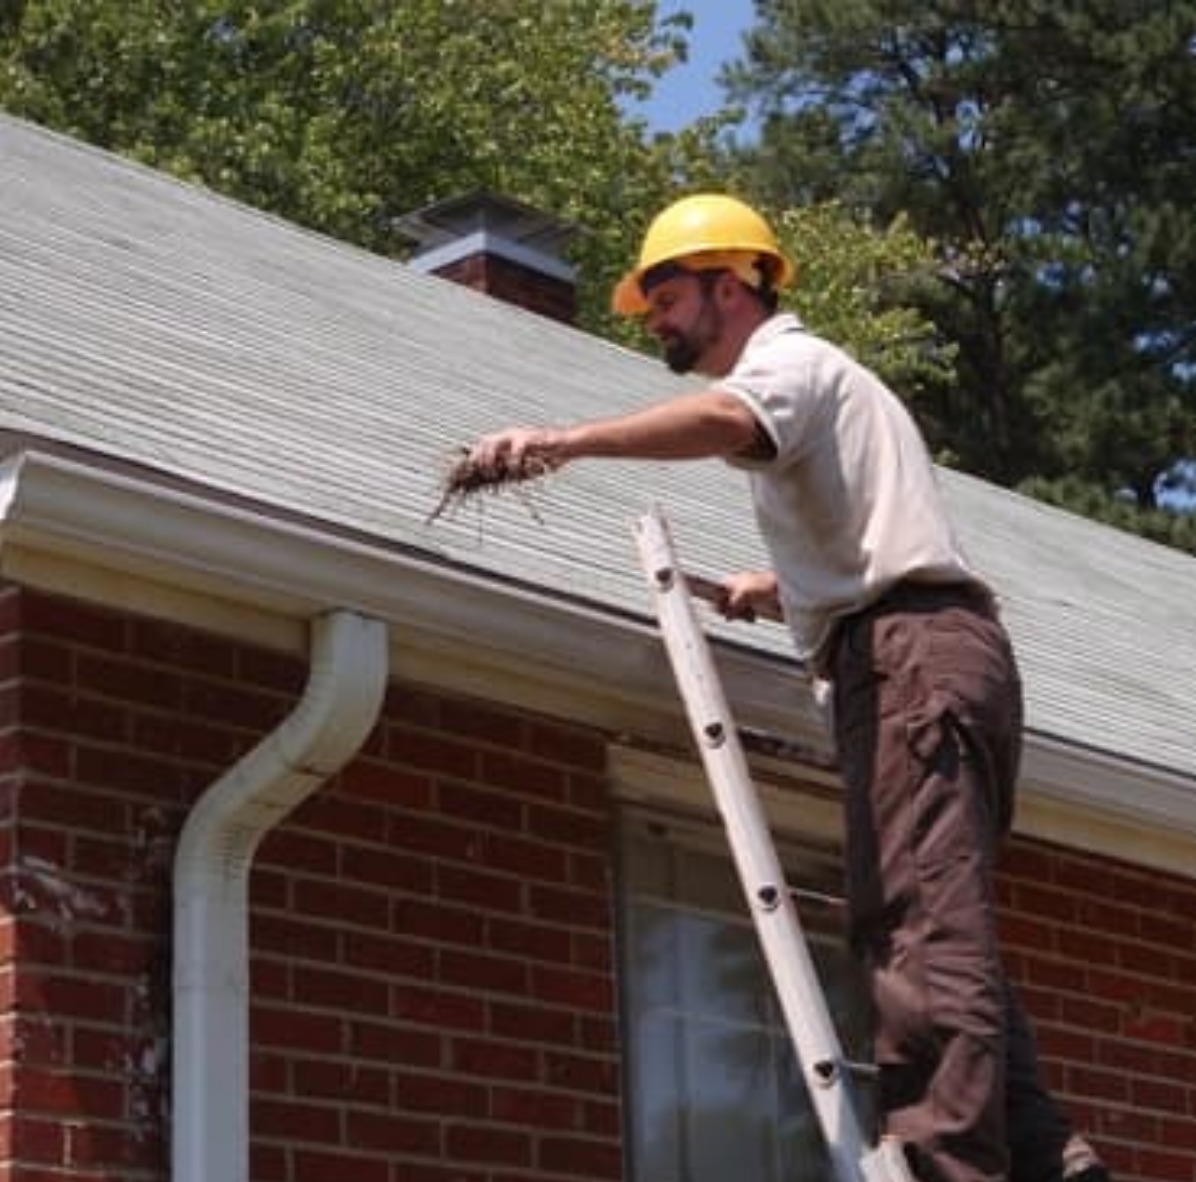 Cortlandt NY Gutter Cleaning Company